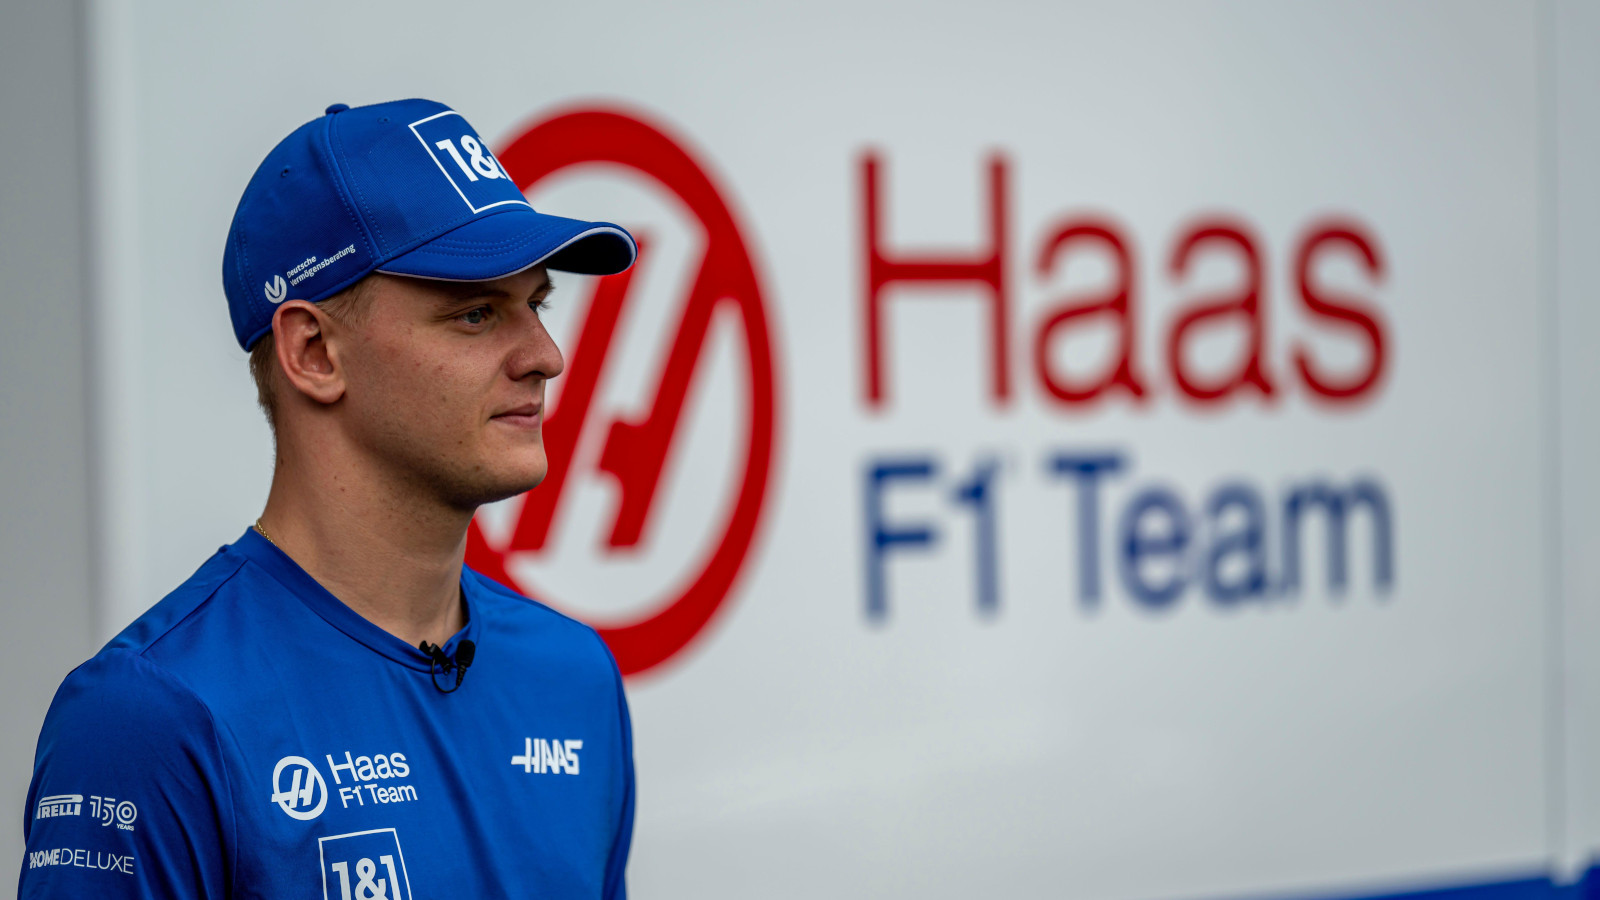 Mick Schumacher with the Haas branding in the background. Mexico October 2022